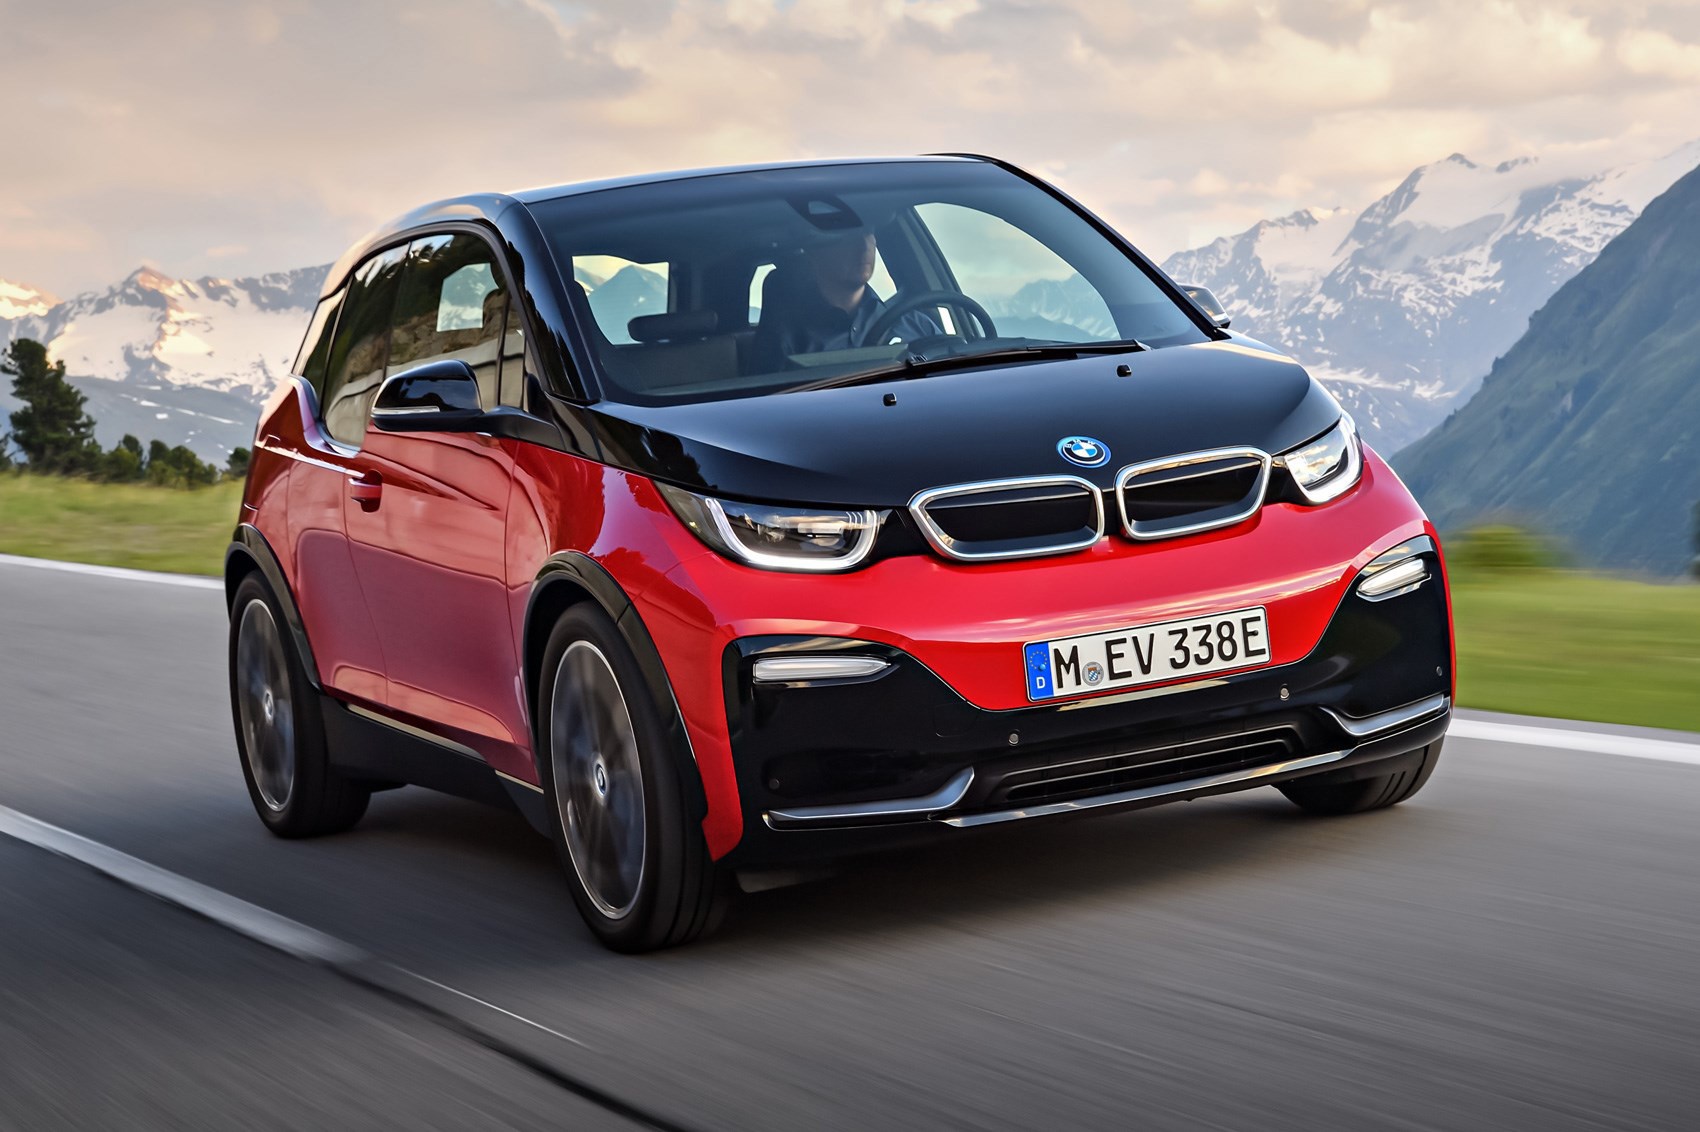 BMW i3 Looks Surprisingly Fun on the Nürburgring - Video